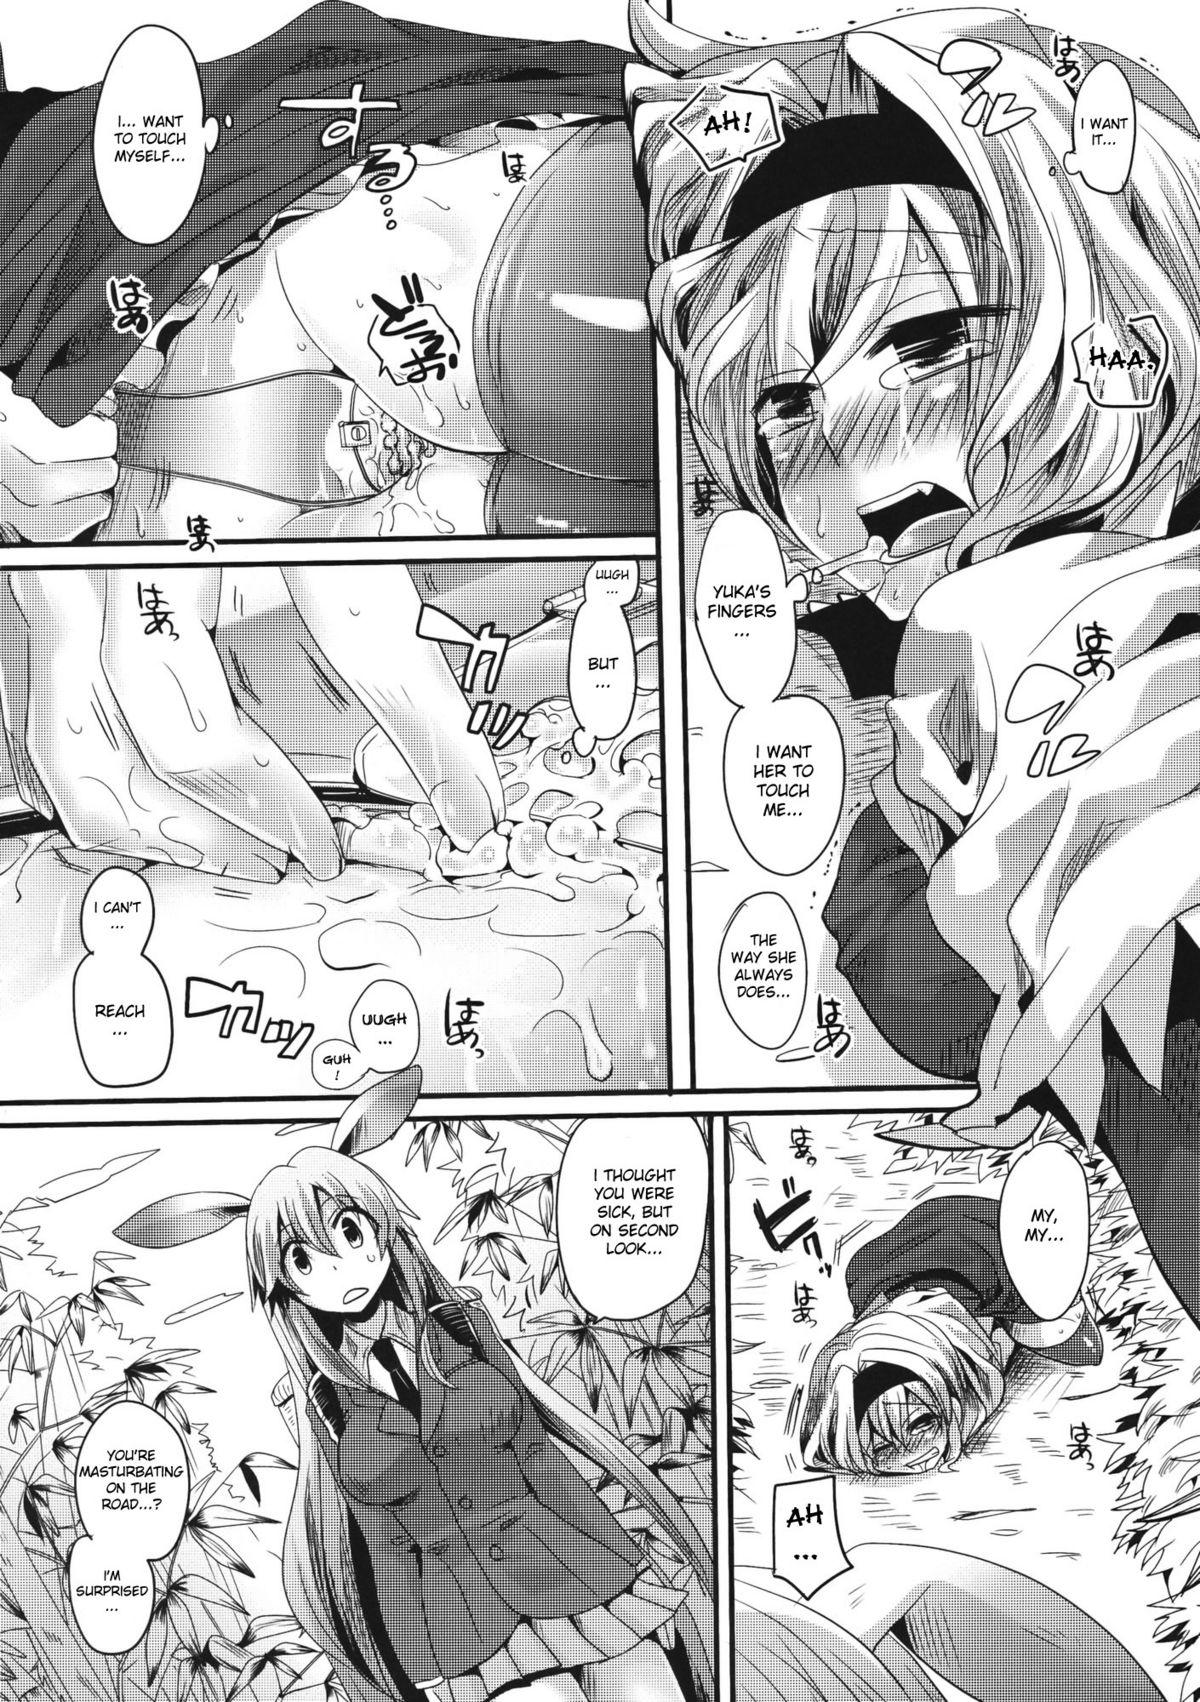 Nut Yuuka ga do S de Alice ga M de | Yuuka is a Sadist, While Alice is a Masochist - Touhou project Whore - Page 11